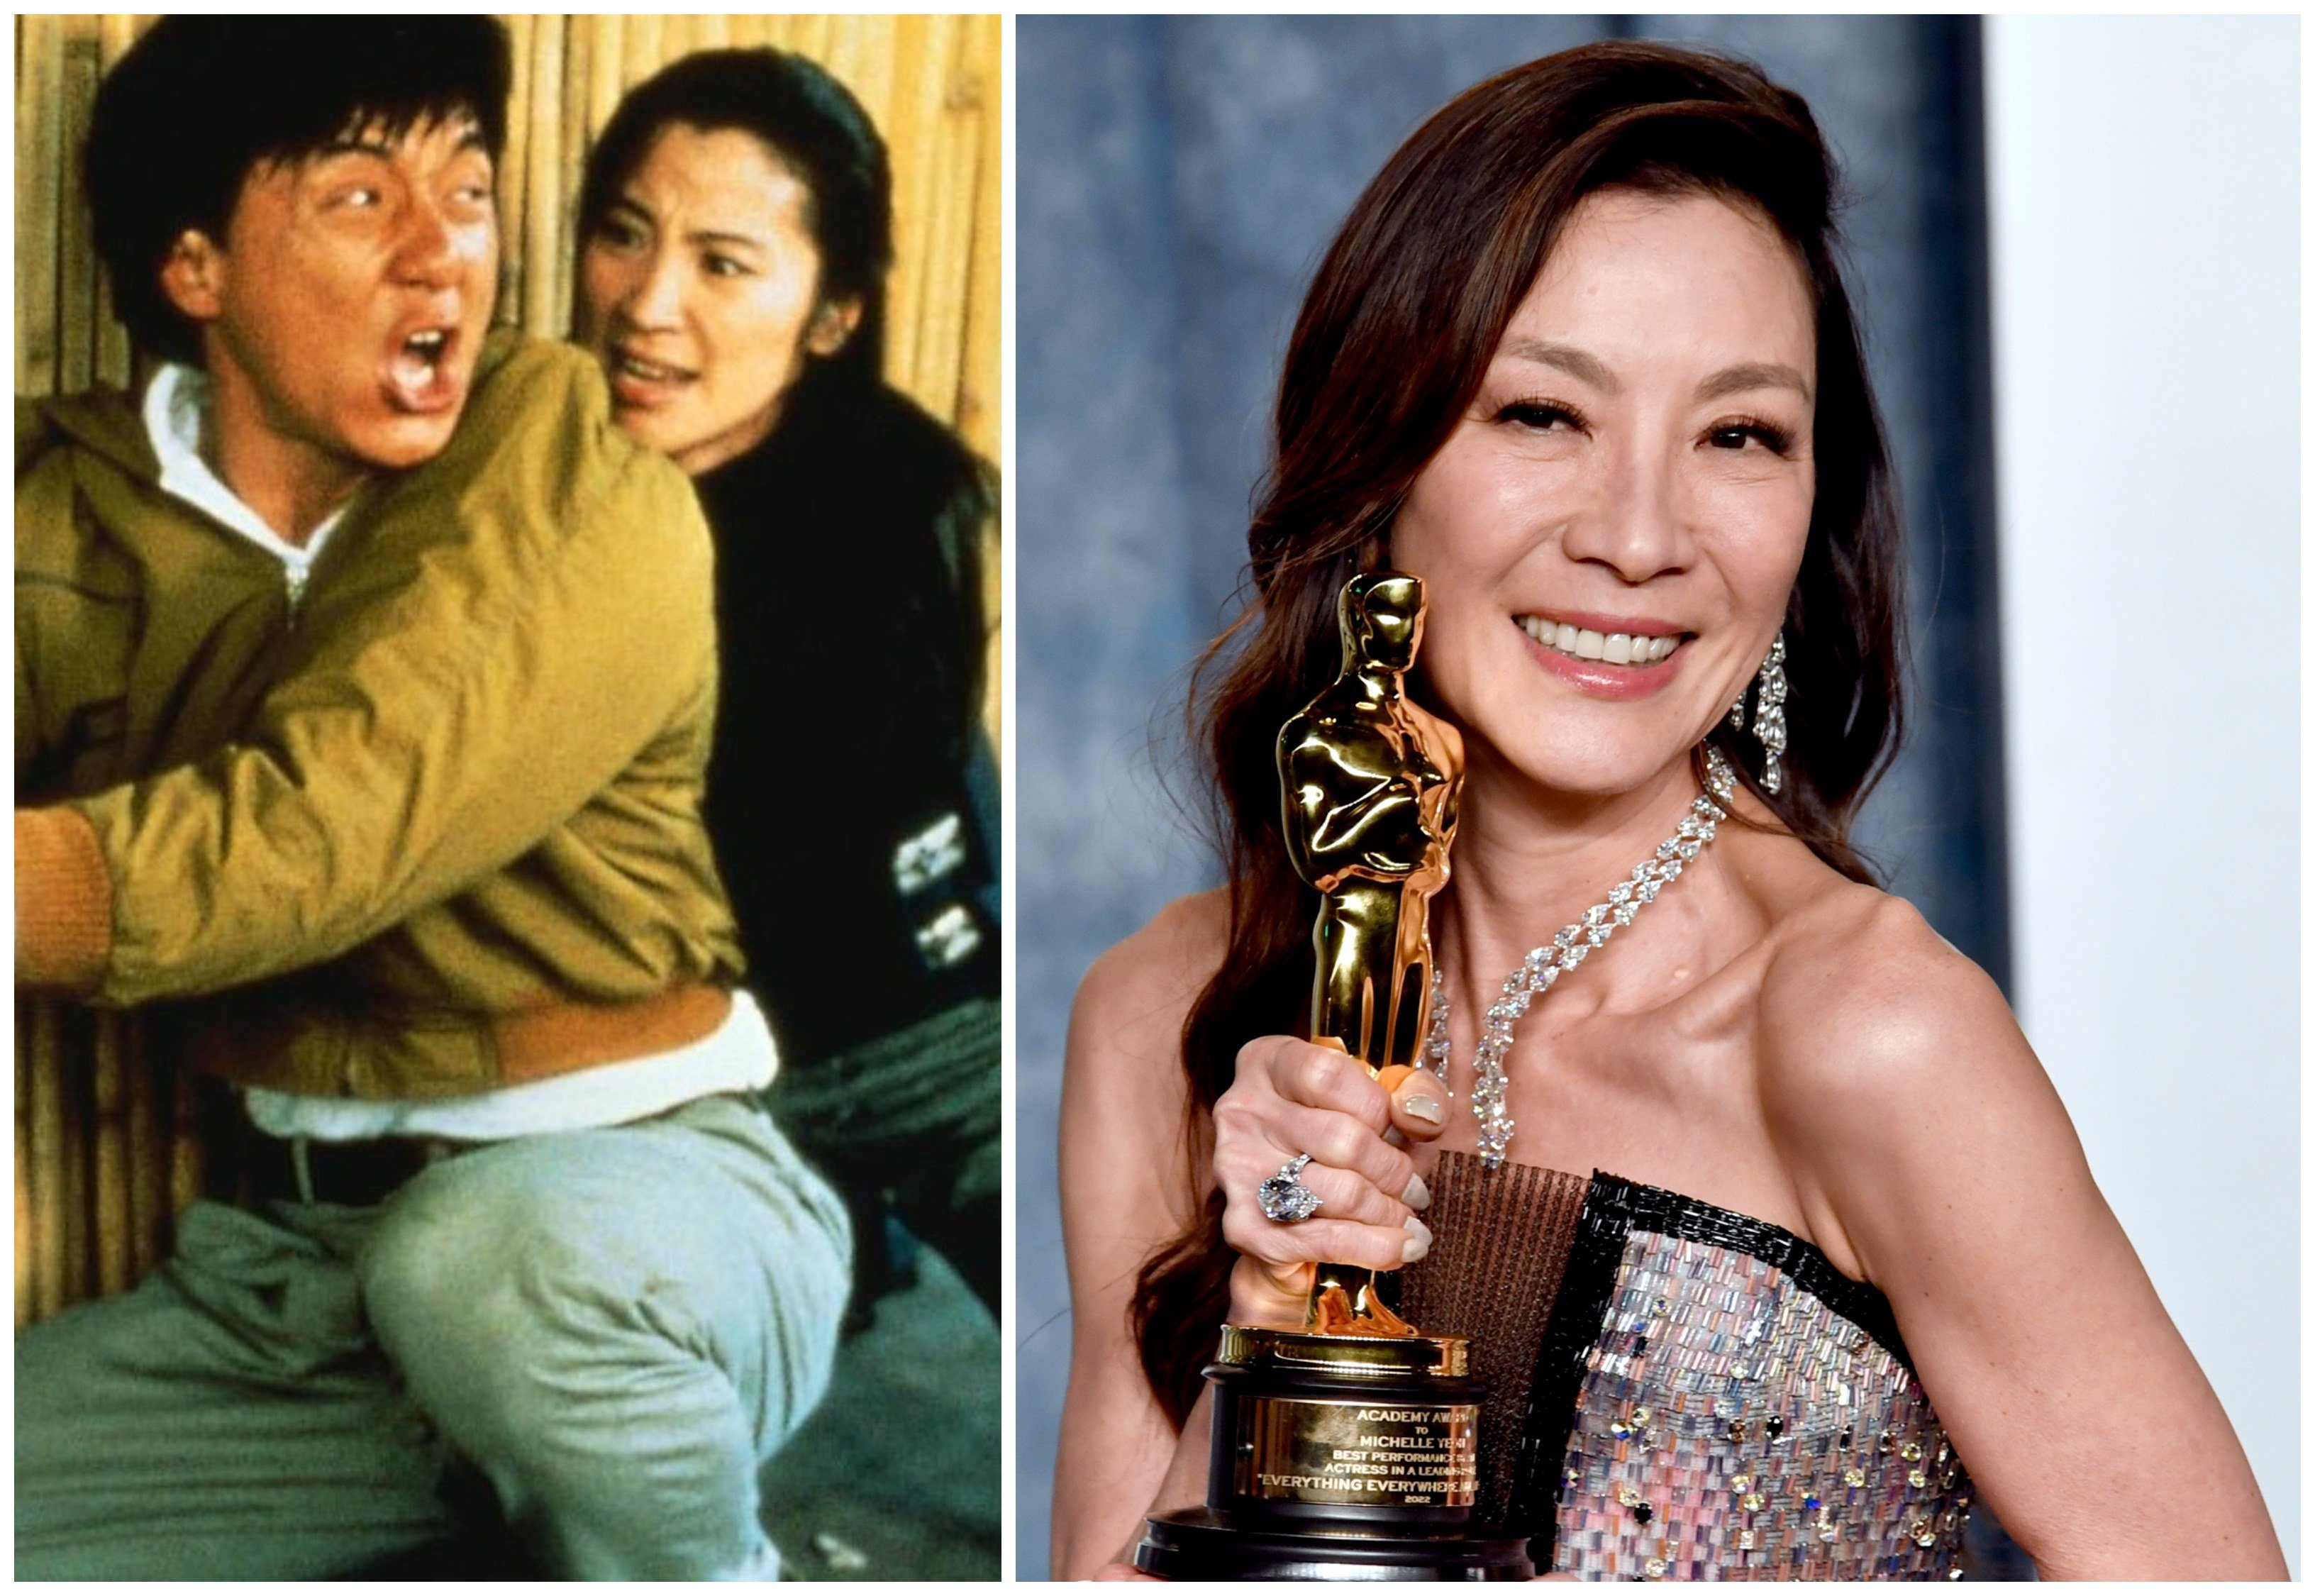 Michelle Yeoh got her first big break in Hollywood after starring in Hong Kong action films in the 1980s and 1990s. Photos: AP; Golden Harvest